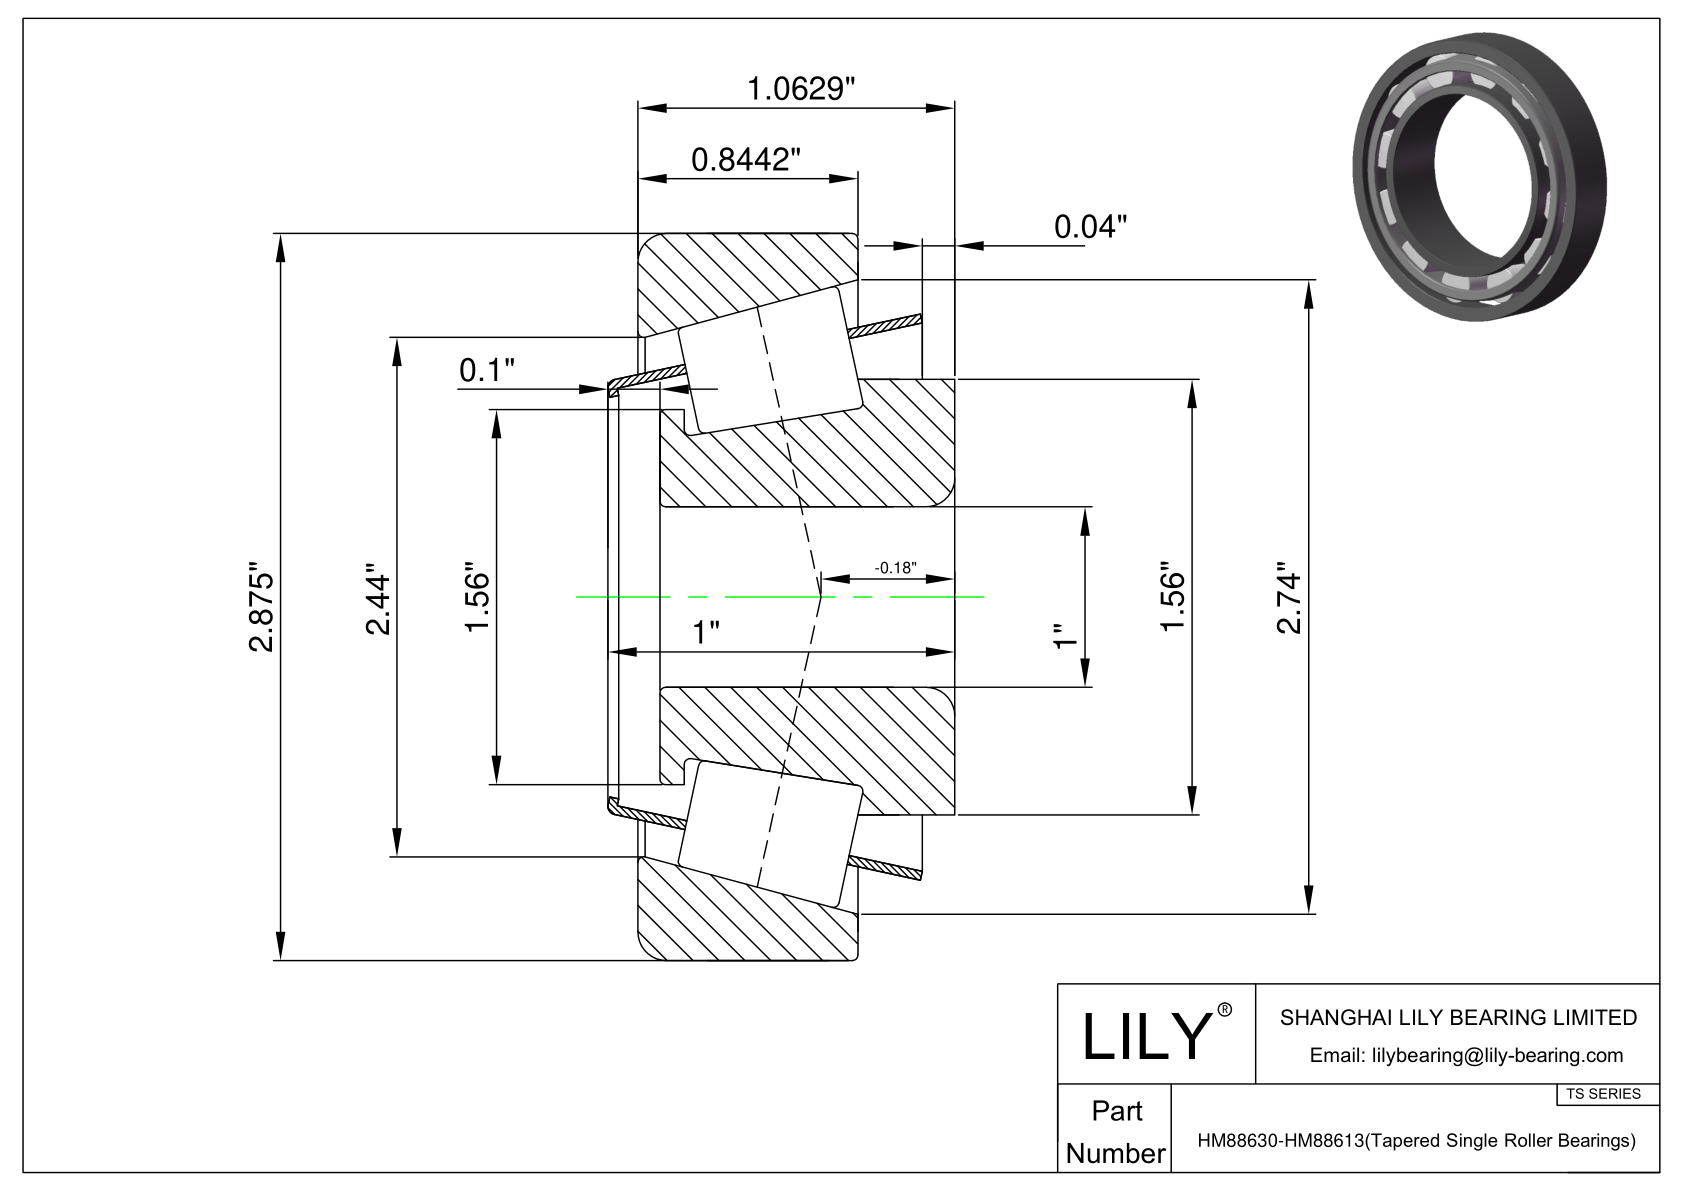 HM88630-HM88613 TS (Tapered Single Roller Bearings) (Imperial) cad drawing